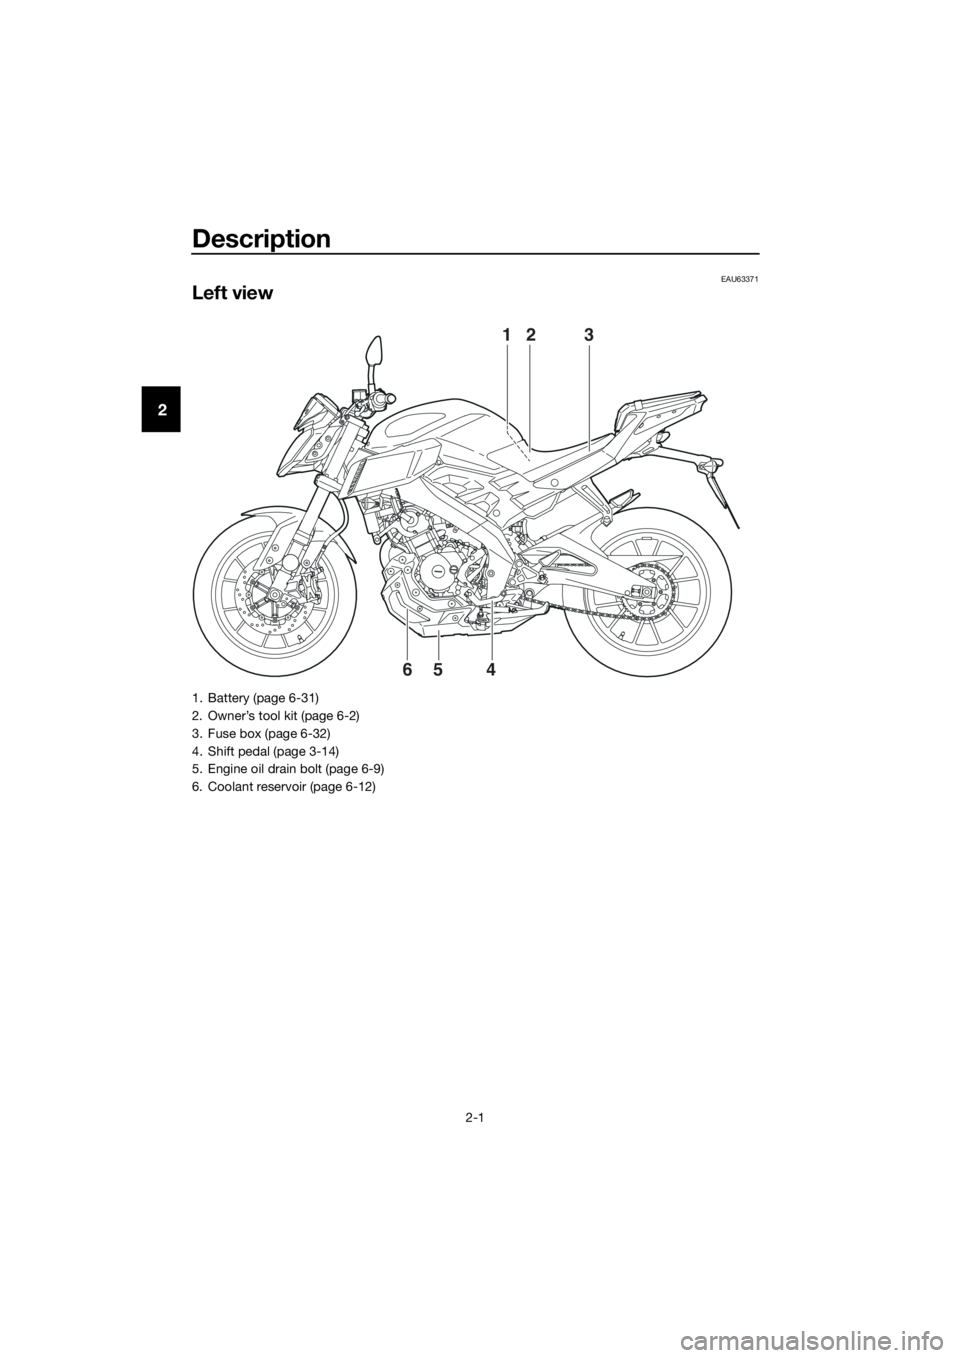 YAMAHA MT-125 2018  Owners Manual Description
2-1
2
EAU63371
Left view
213
465
1. Battery (page 6-31)
2. Owner’s tool kit (page 6-2)
3. Fuse box (page 6-32)
4. Shift pedal (page 3-14)
5. Engine oil drain bolt (page 6-9)
6. Coolant r